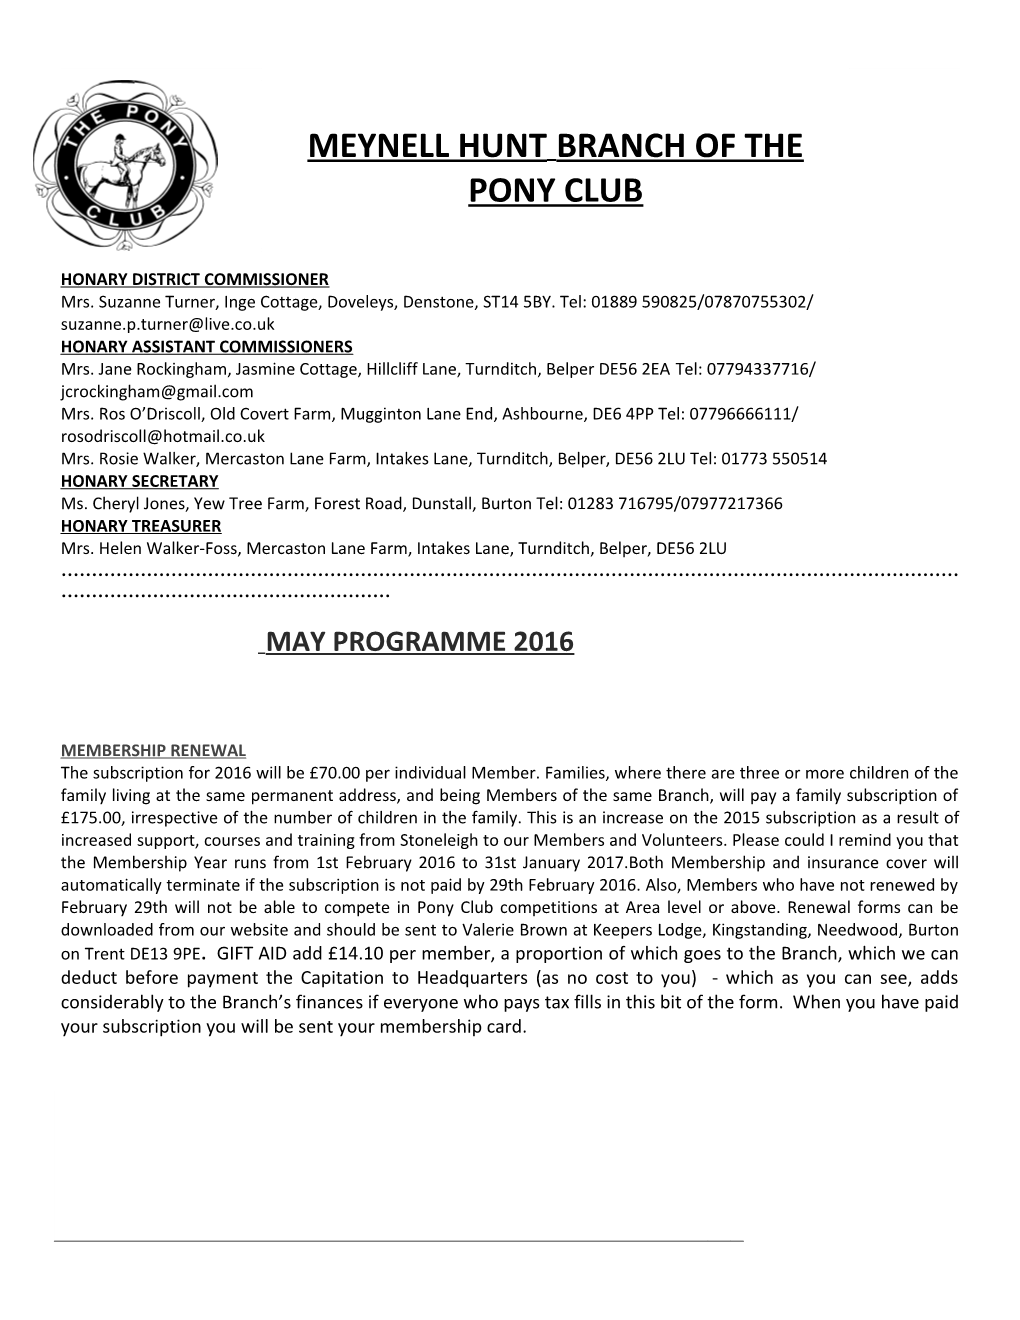 Meynell Hunt Branch of the Pony Club s1